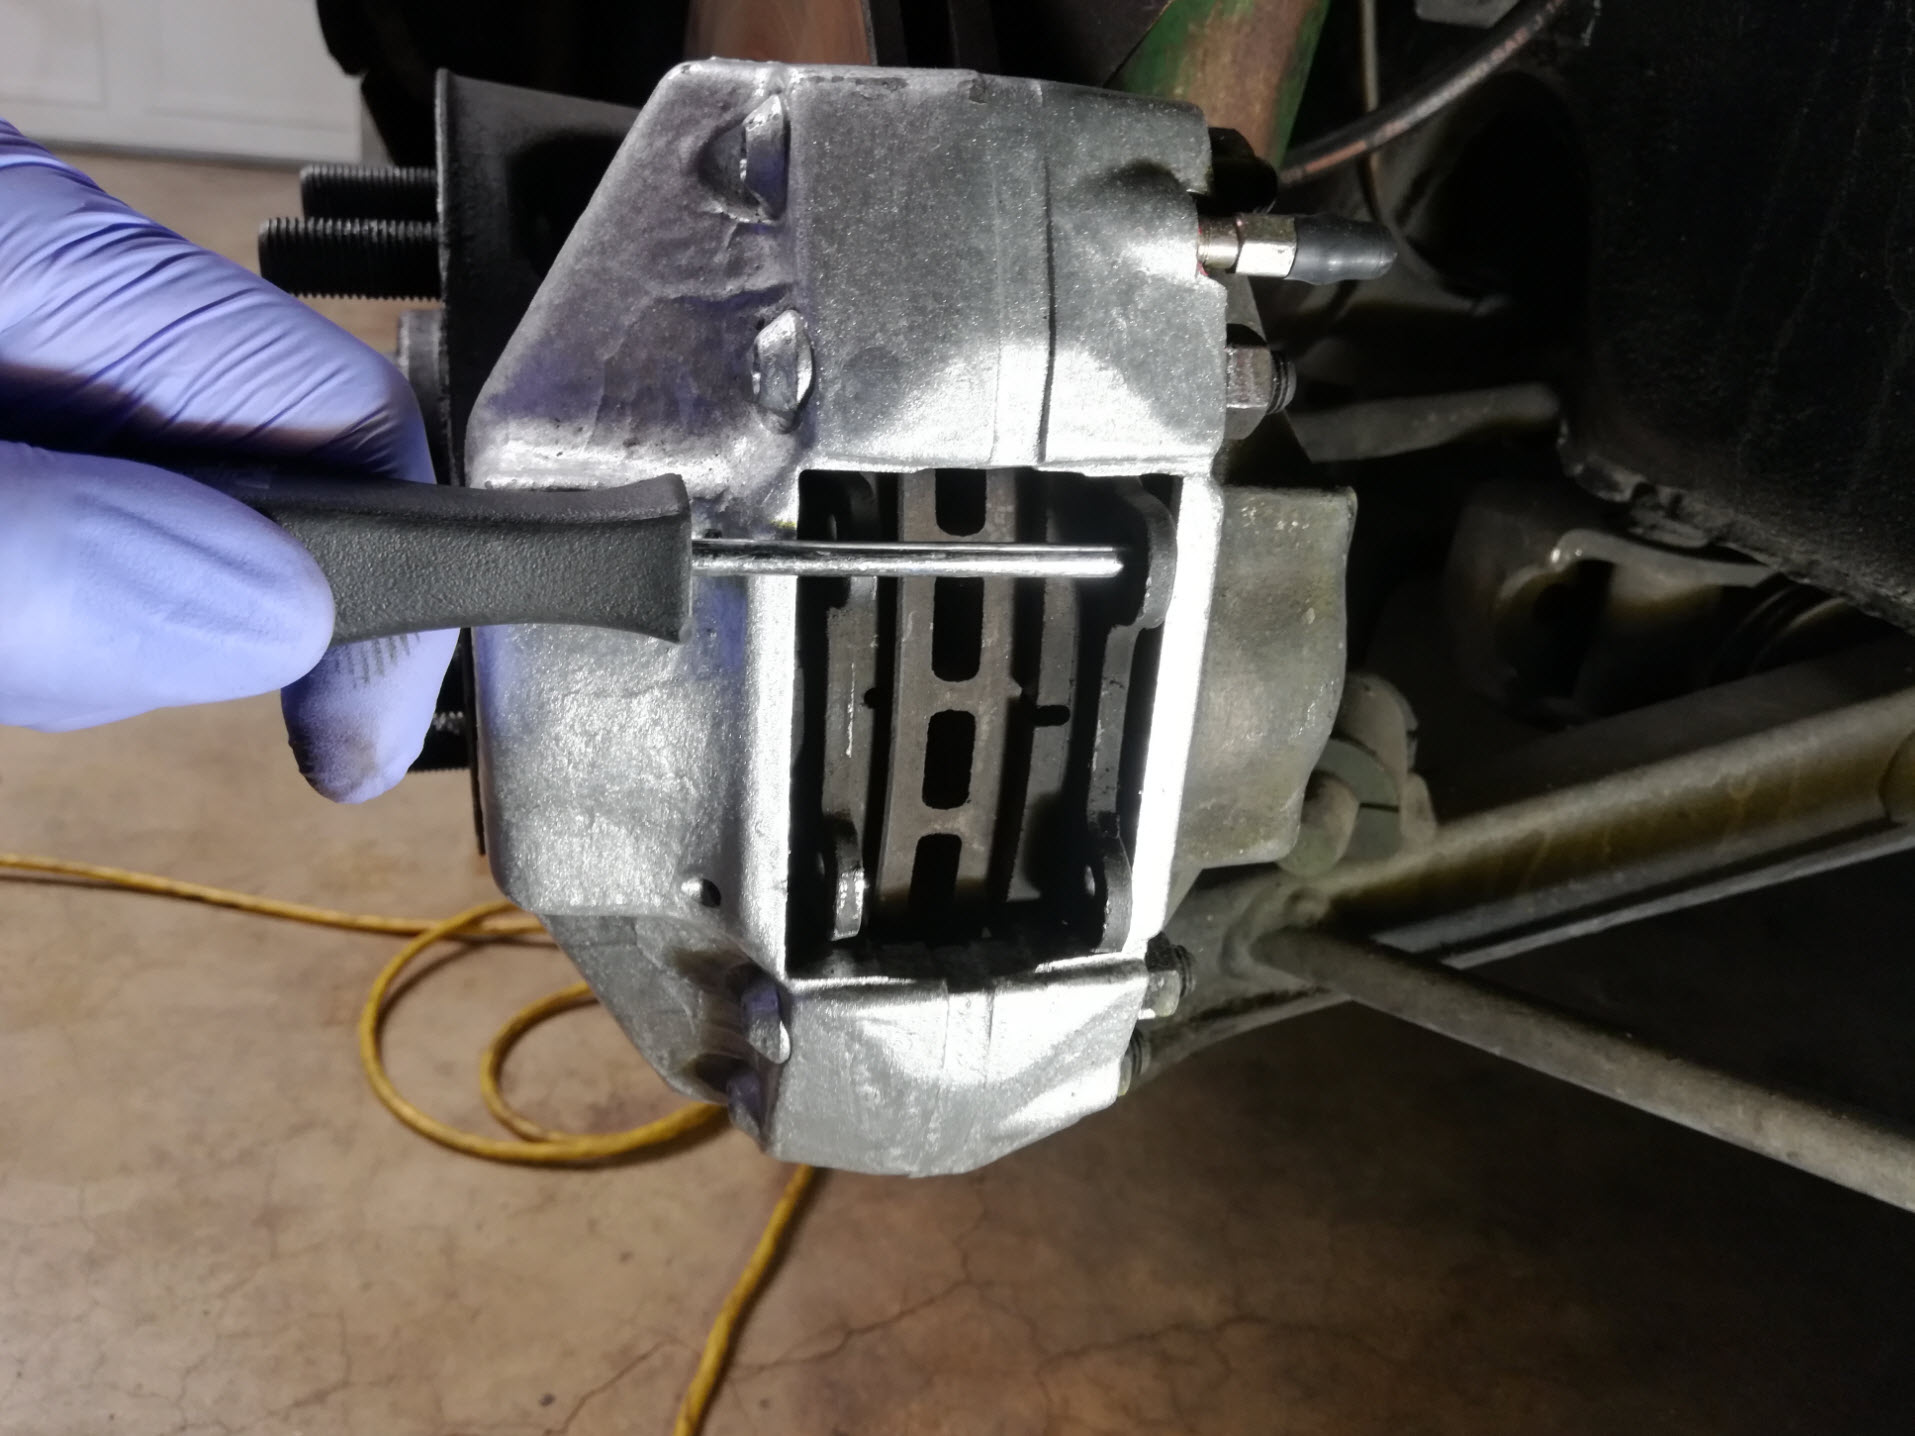 Air-cooled Porsche 911 brake pad removal tip.